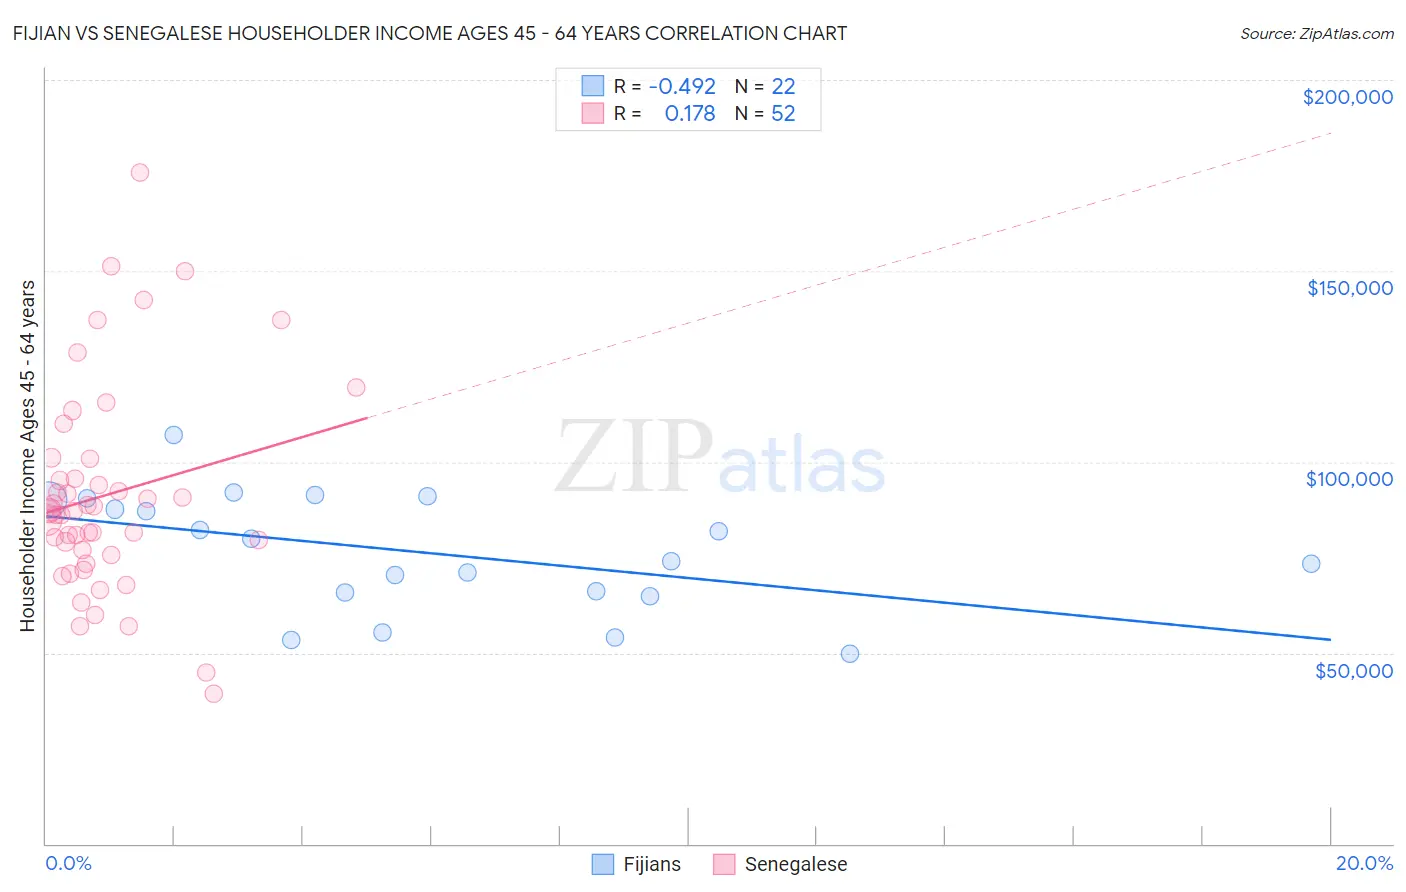 Fijian vs Senegalese Householder Income Ages 45 - 64 years